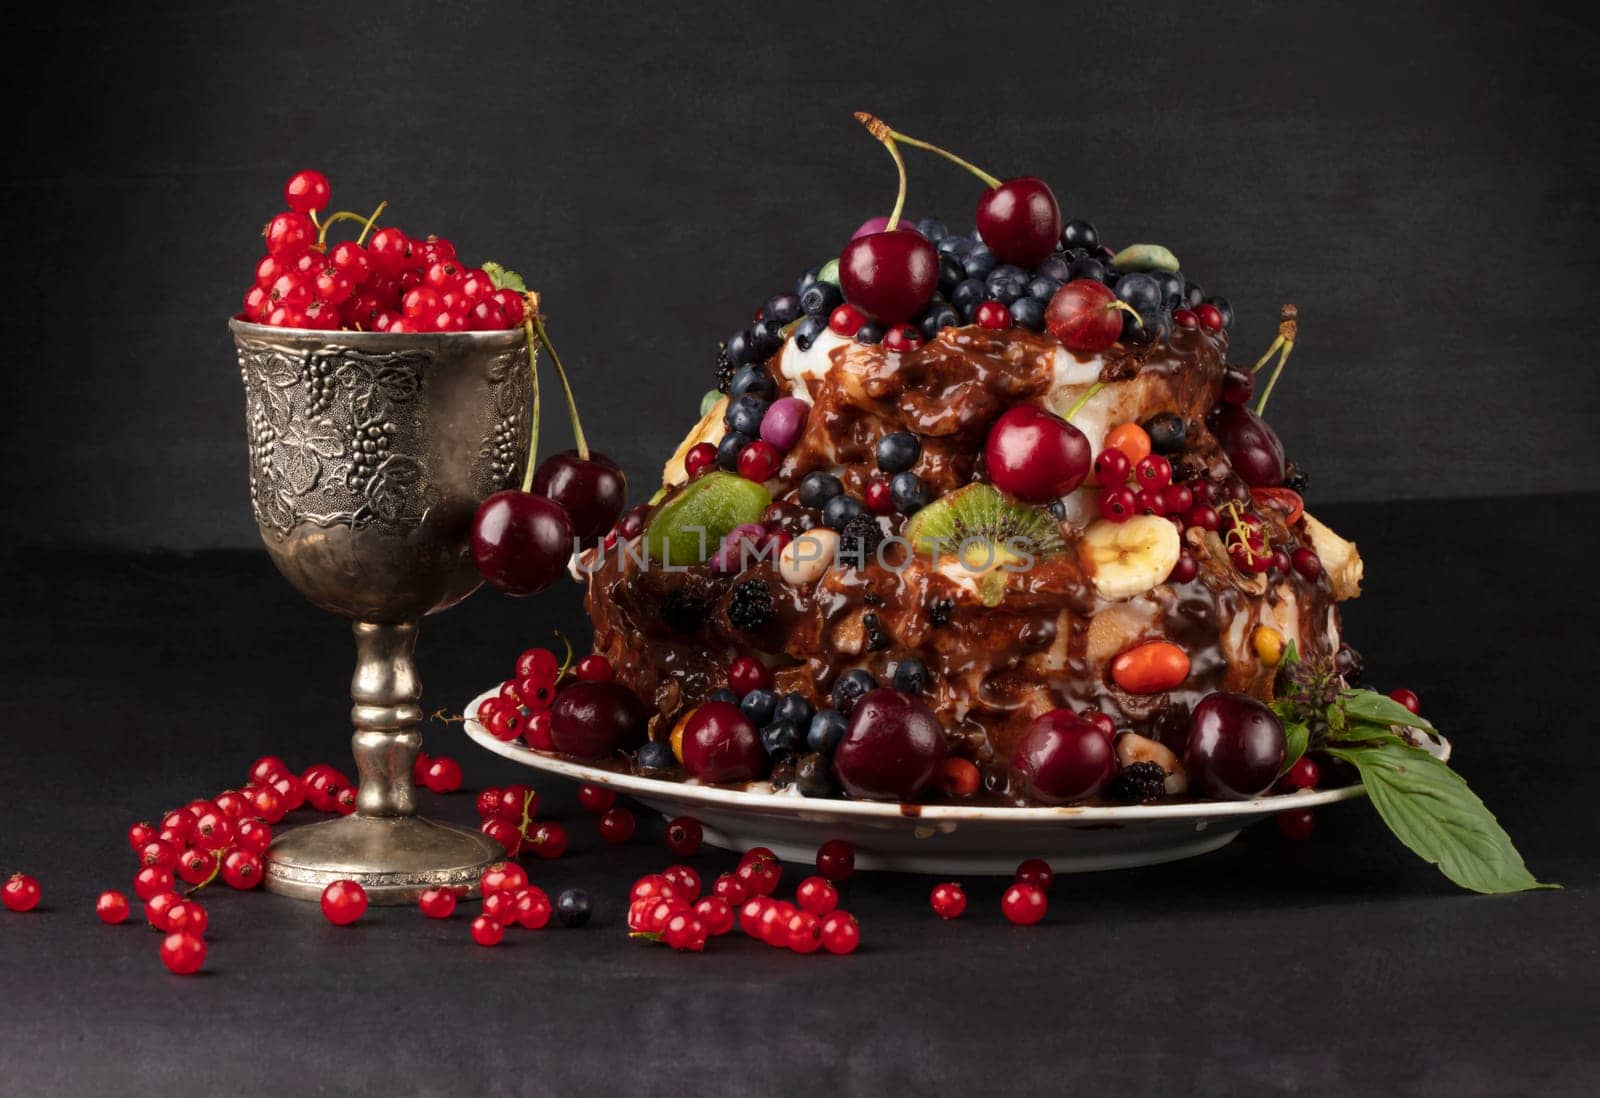 A luxurious cake with fruits and berries in a glass goblet on a dark background.